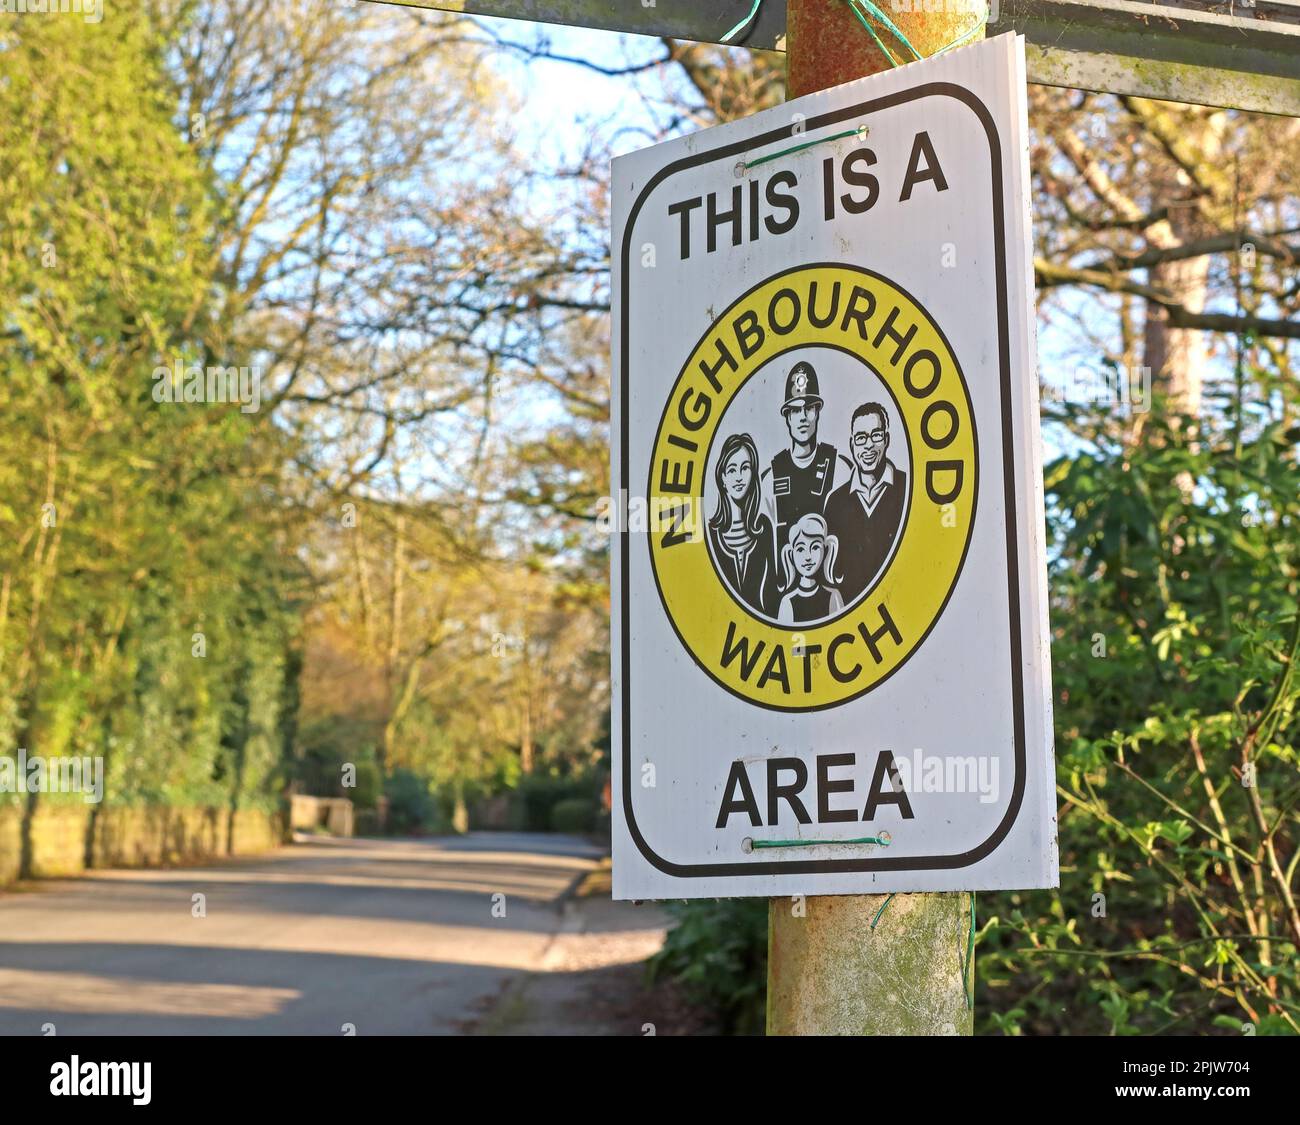 This is a Neighbourhood Watch Area sign scheme on a streetlamp - lack of police means homeowners need to look after their own UK property security Stock Photo